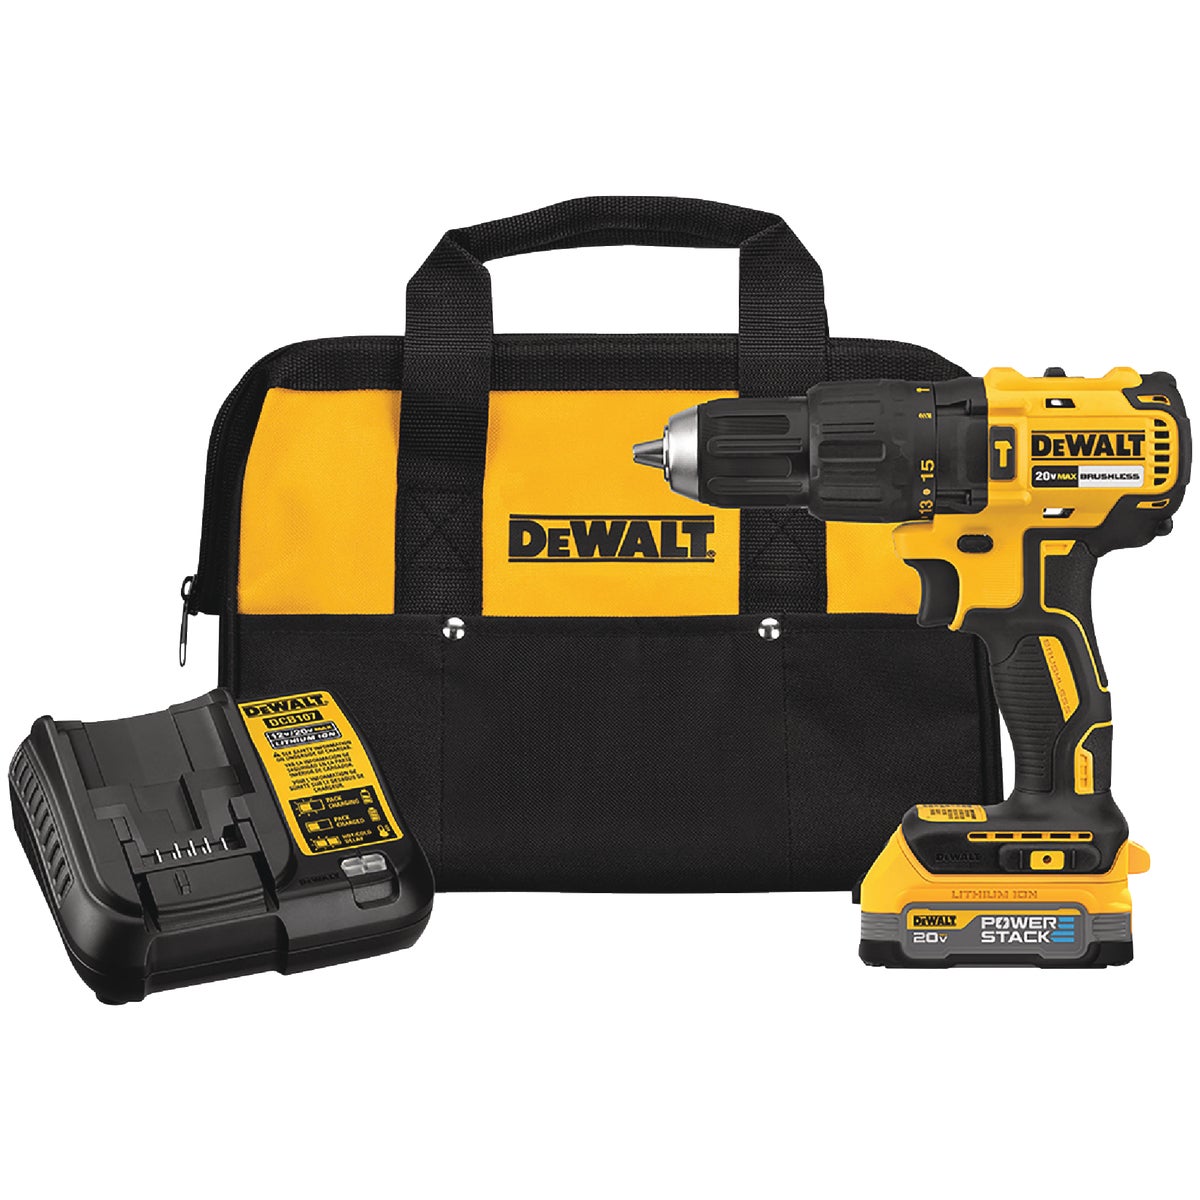 DEWALT 20-Volt MAX Lithium-Ion Brushless 1/2 In. Compact Cordless Hammer Drill Kit with POWERSTACK Battery